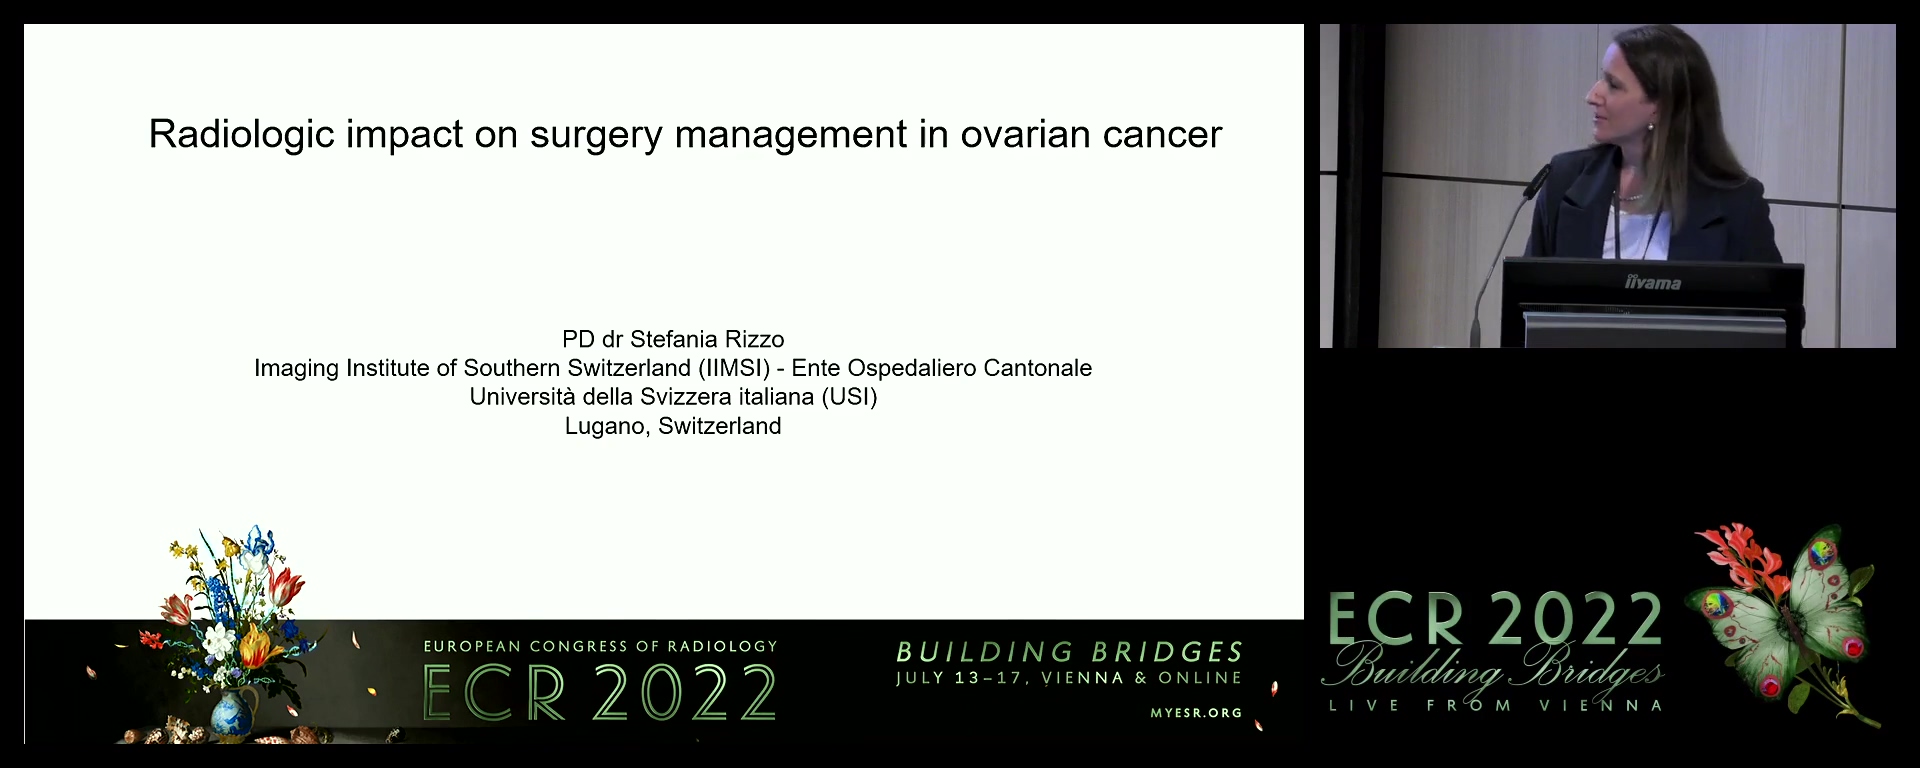 Radiologic impact on surgery management in ovarian cancer